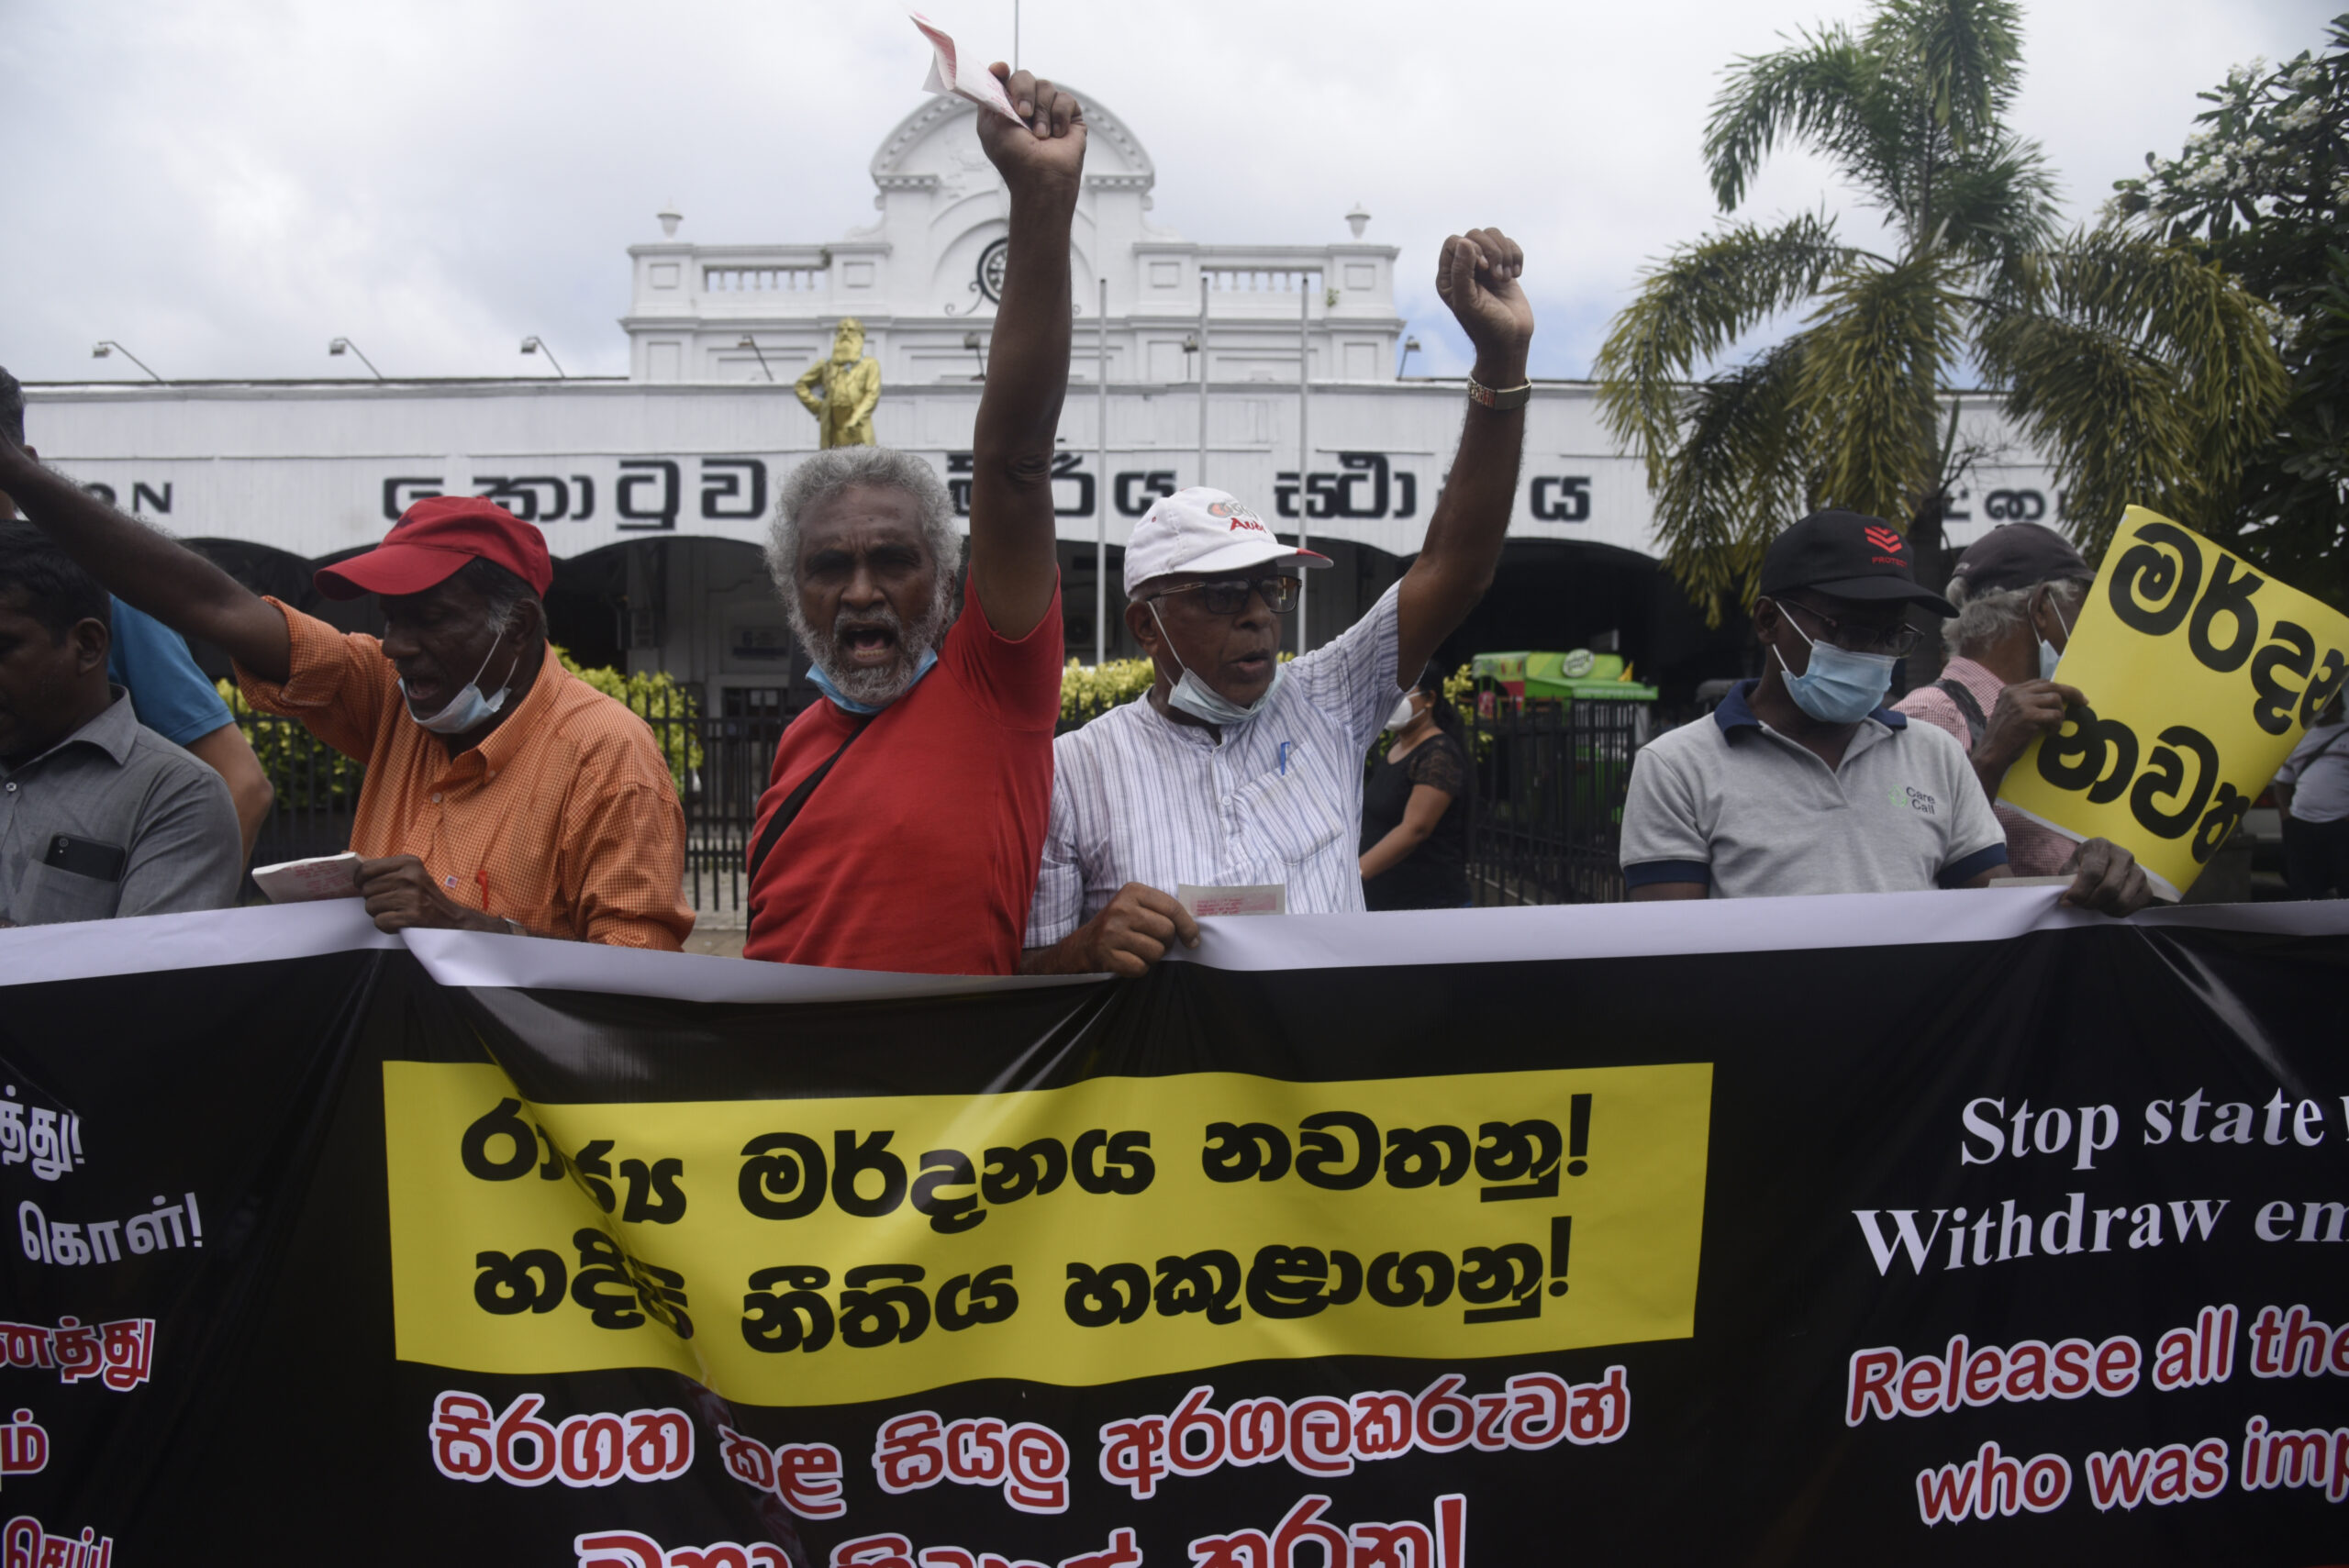 Protesters demanding the end of government repression and the withdrawal of the emergency law in Sri Lanka